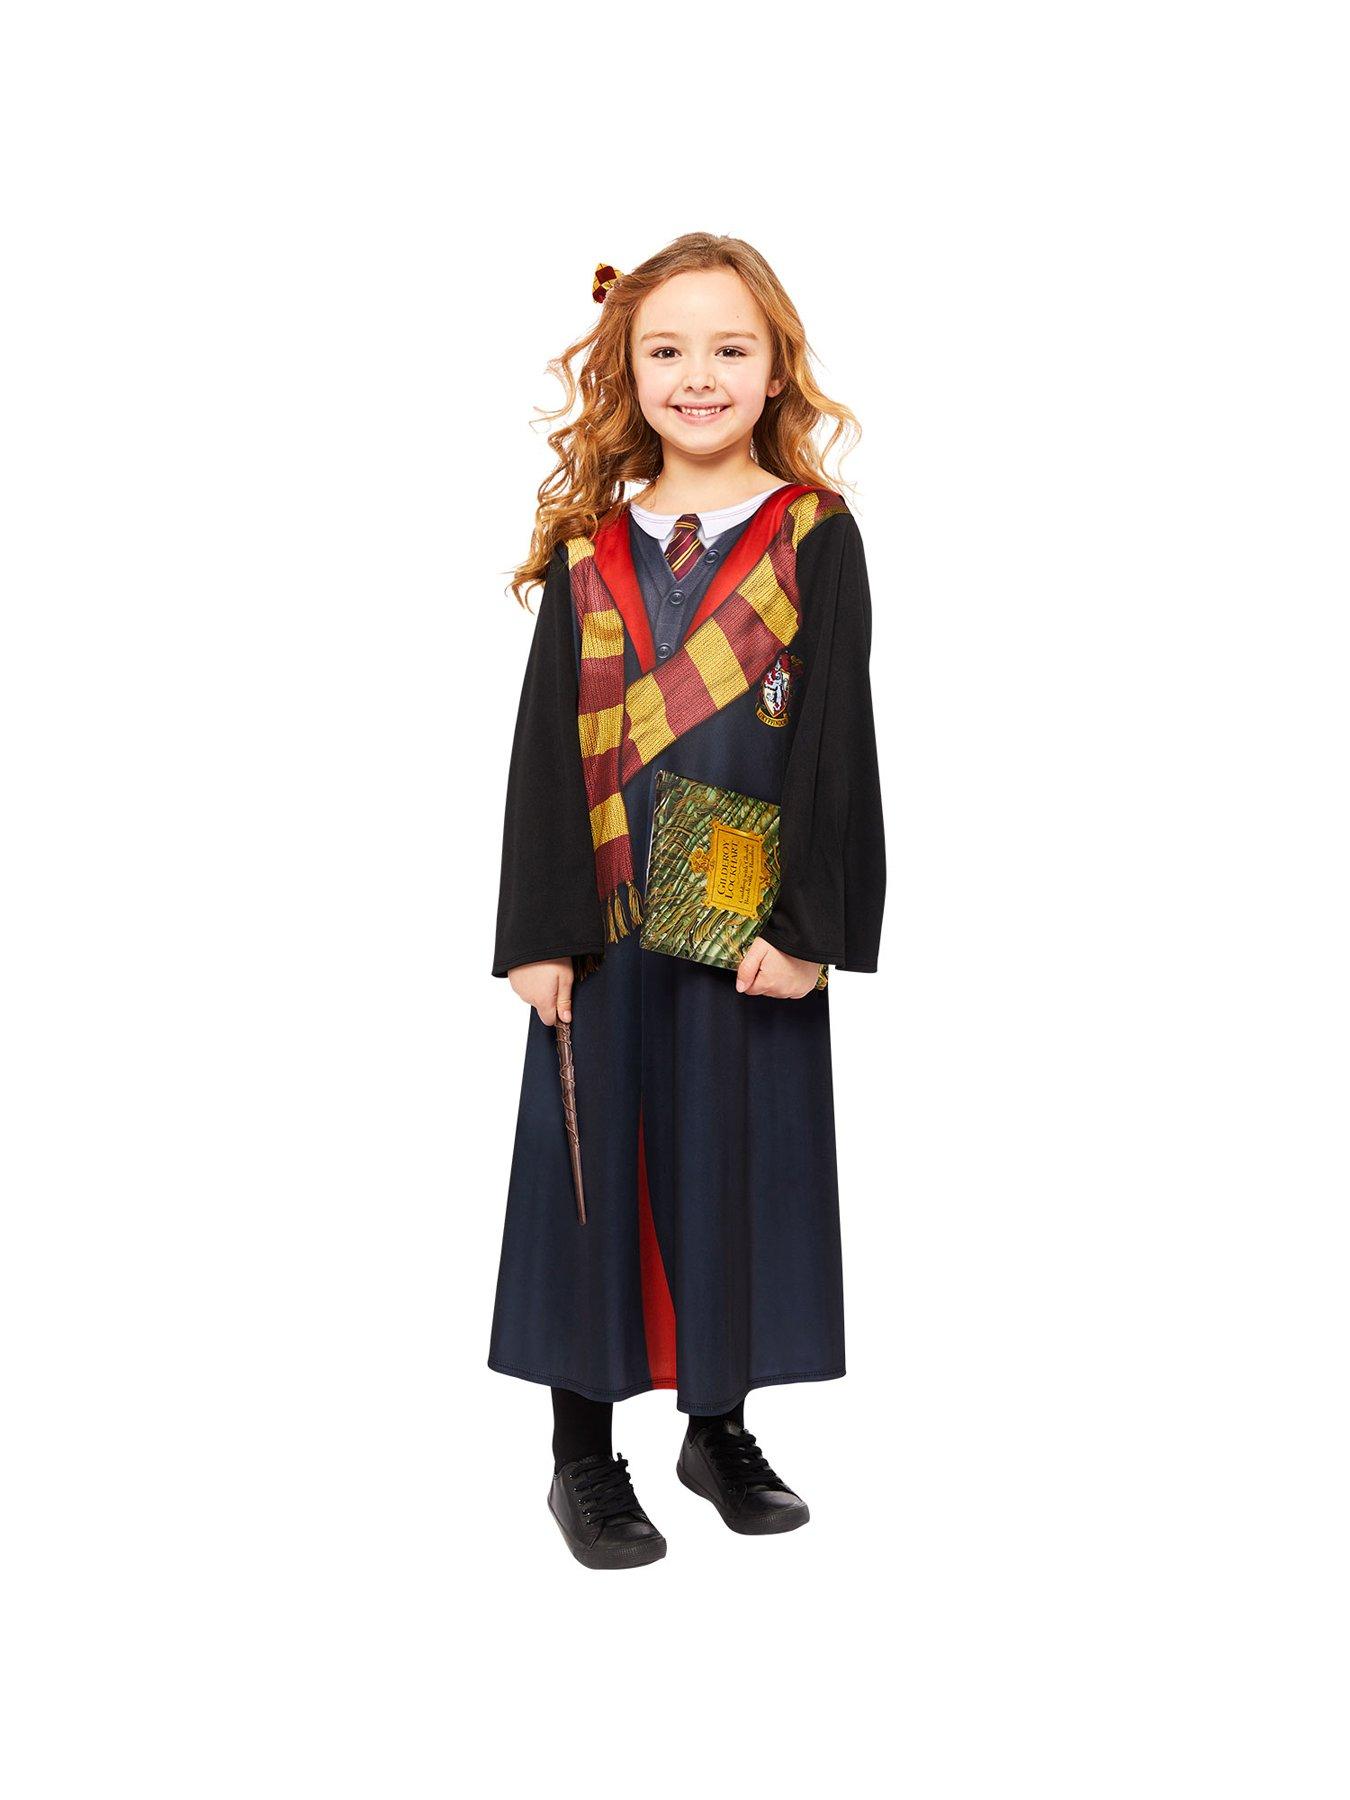 52 Siriusly Creative Harry Potter Costume Ideas For Wizards and Muggles  Alike | Harry potter costume, Harry potter halloween costumes, Harry potter  costume diy